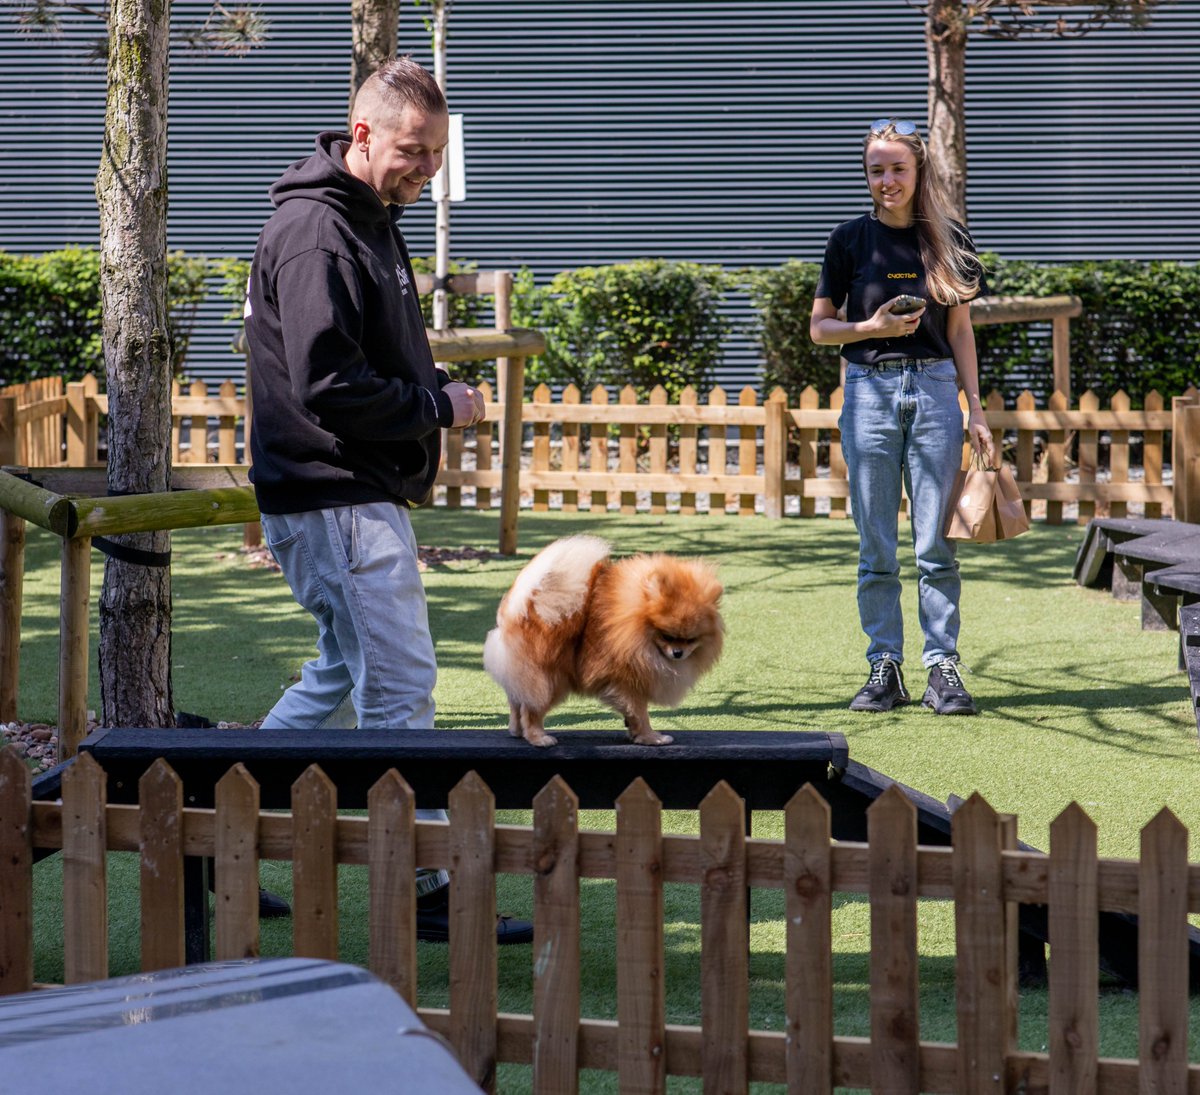 The Renaker difference means going the extra mile for all residents, including pets. Amenities such as a purpose-built dog park and Urban Tails self-service dog spas allow residents with pets to feel truly at home. #NationalPetDay #PetFriendly